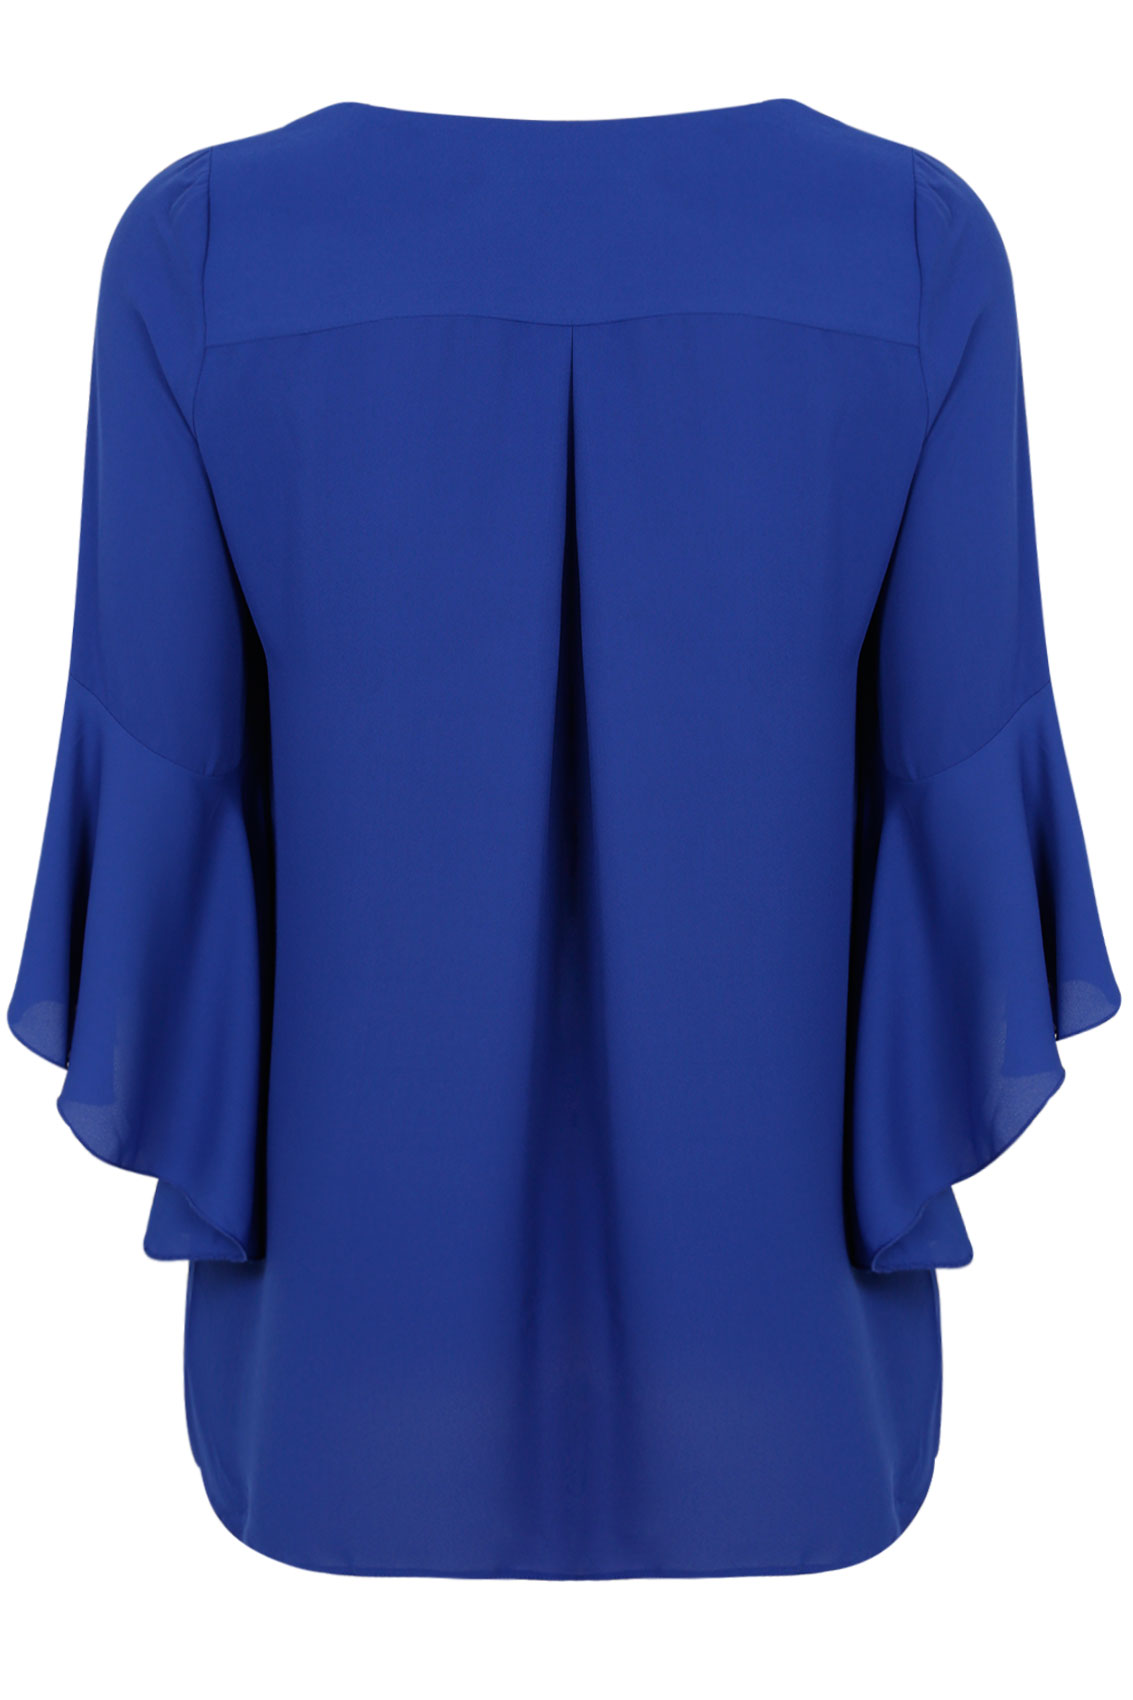 Cobalt Blue Blouse With Bell Sleeves Plus Size 16 to 32